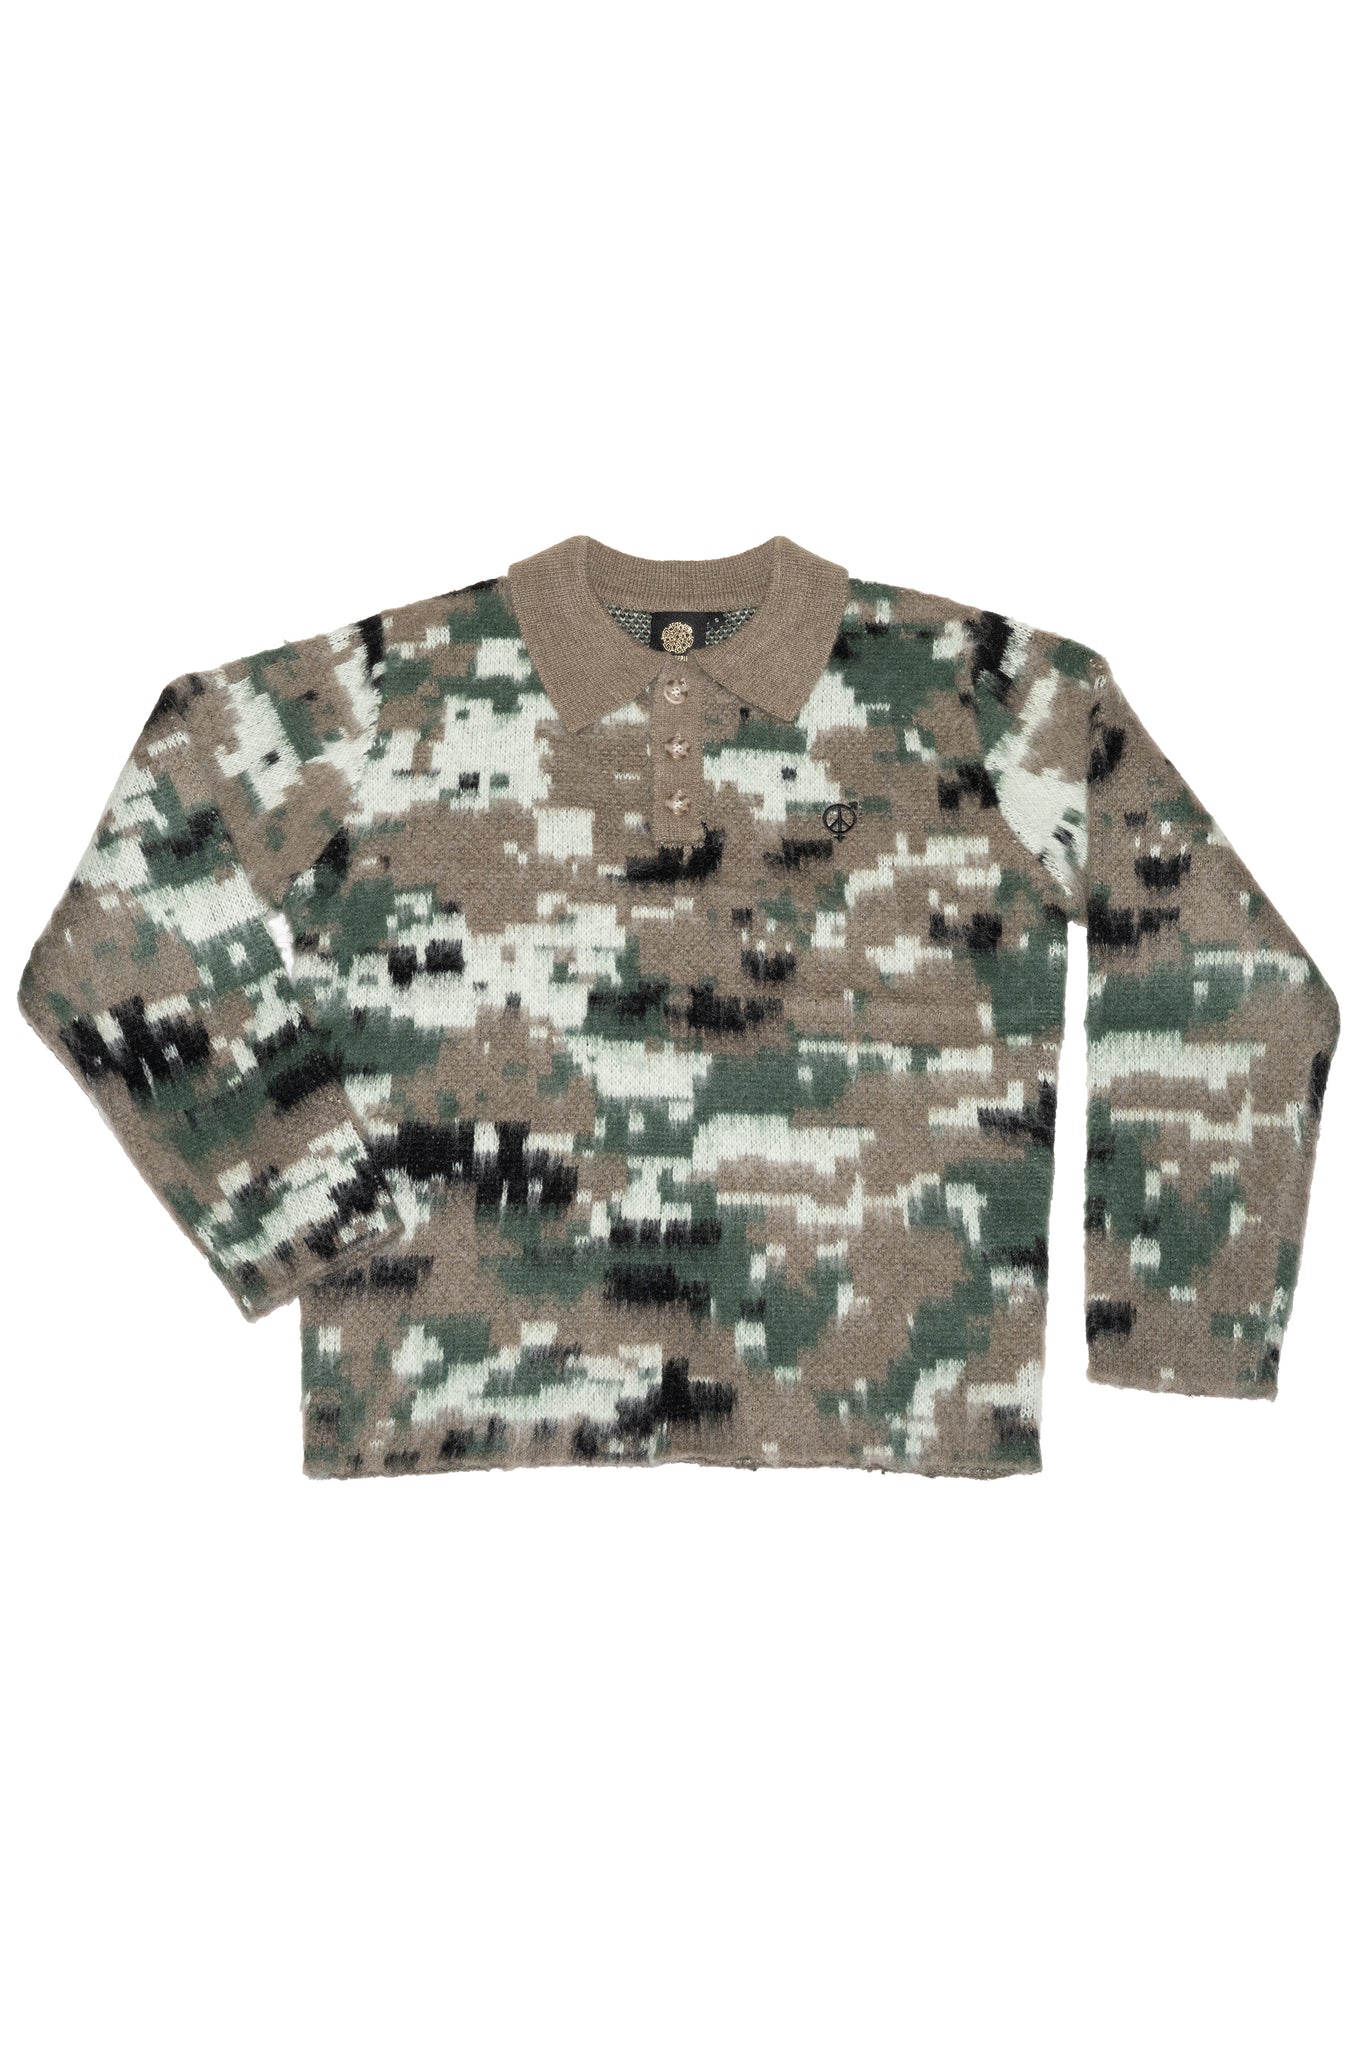 BRUSHED MOHAIR RUGBY SWEATER IN DIGITAL CAMO